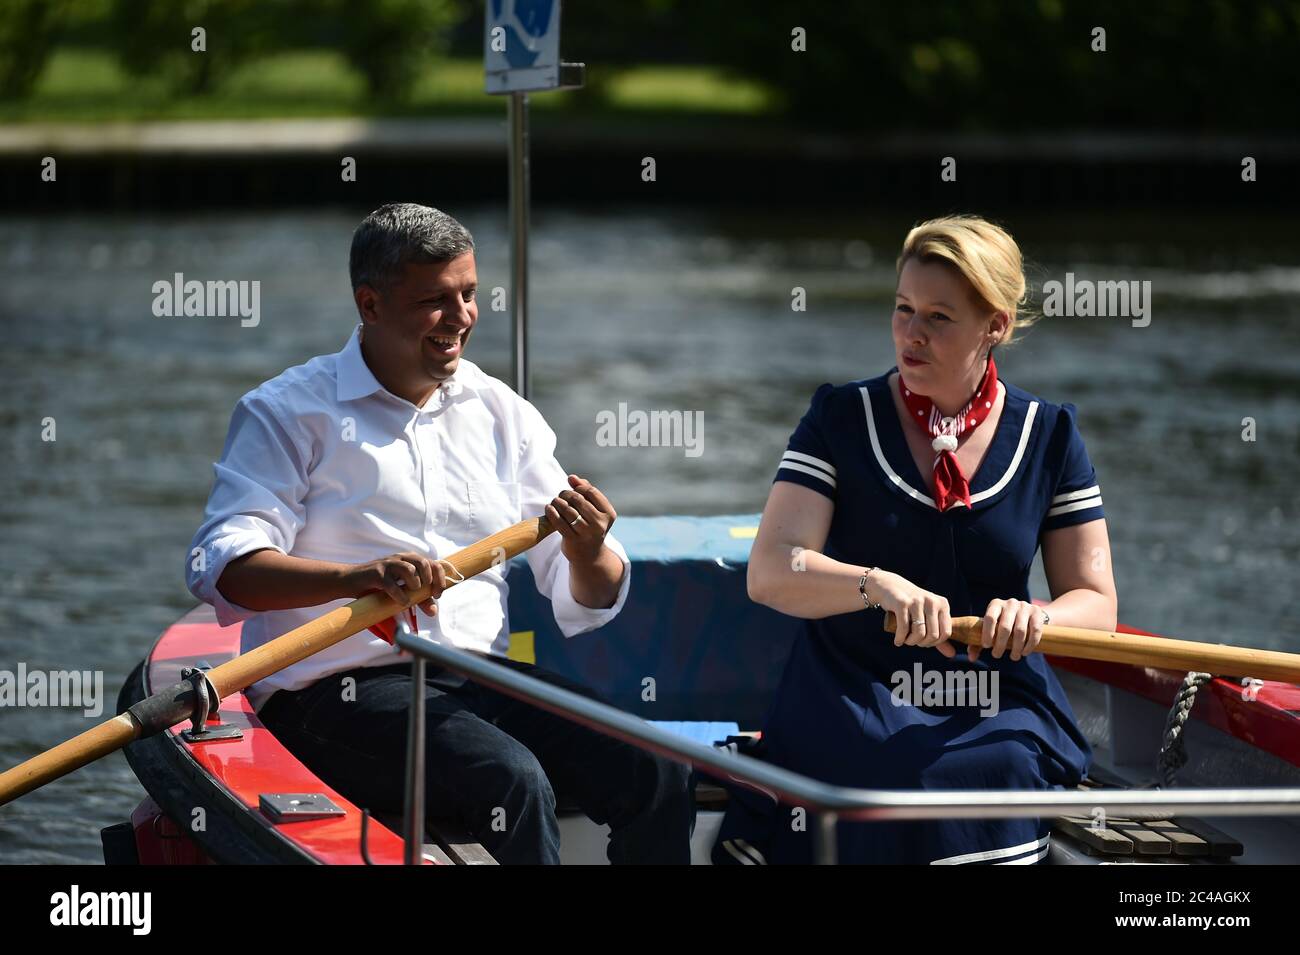 Berlin, Germany. 25th June, 2020. Franziska Giffey (r), Federal Minister for Family Affairs, and Raed Saleh (both SPD), SPD parliamentary party leader in Berlin, cross the Müggelsee on a rowing boat ferry to visit the professional fishermen in the Müggelsee fishery. Giffey and Saleh, who plan to run for the SPD presidency in Berlin together at the SPD party conference in the fall, will inform themselves about the economic situation at the time of the corona pandemic. Credit: Sven Braun/dpa/Alamy Live News Stock Photo